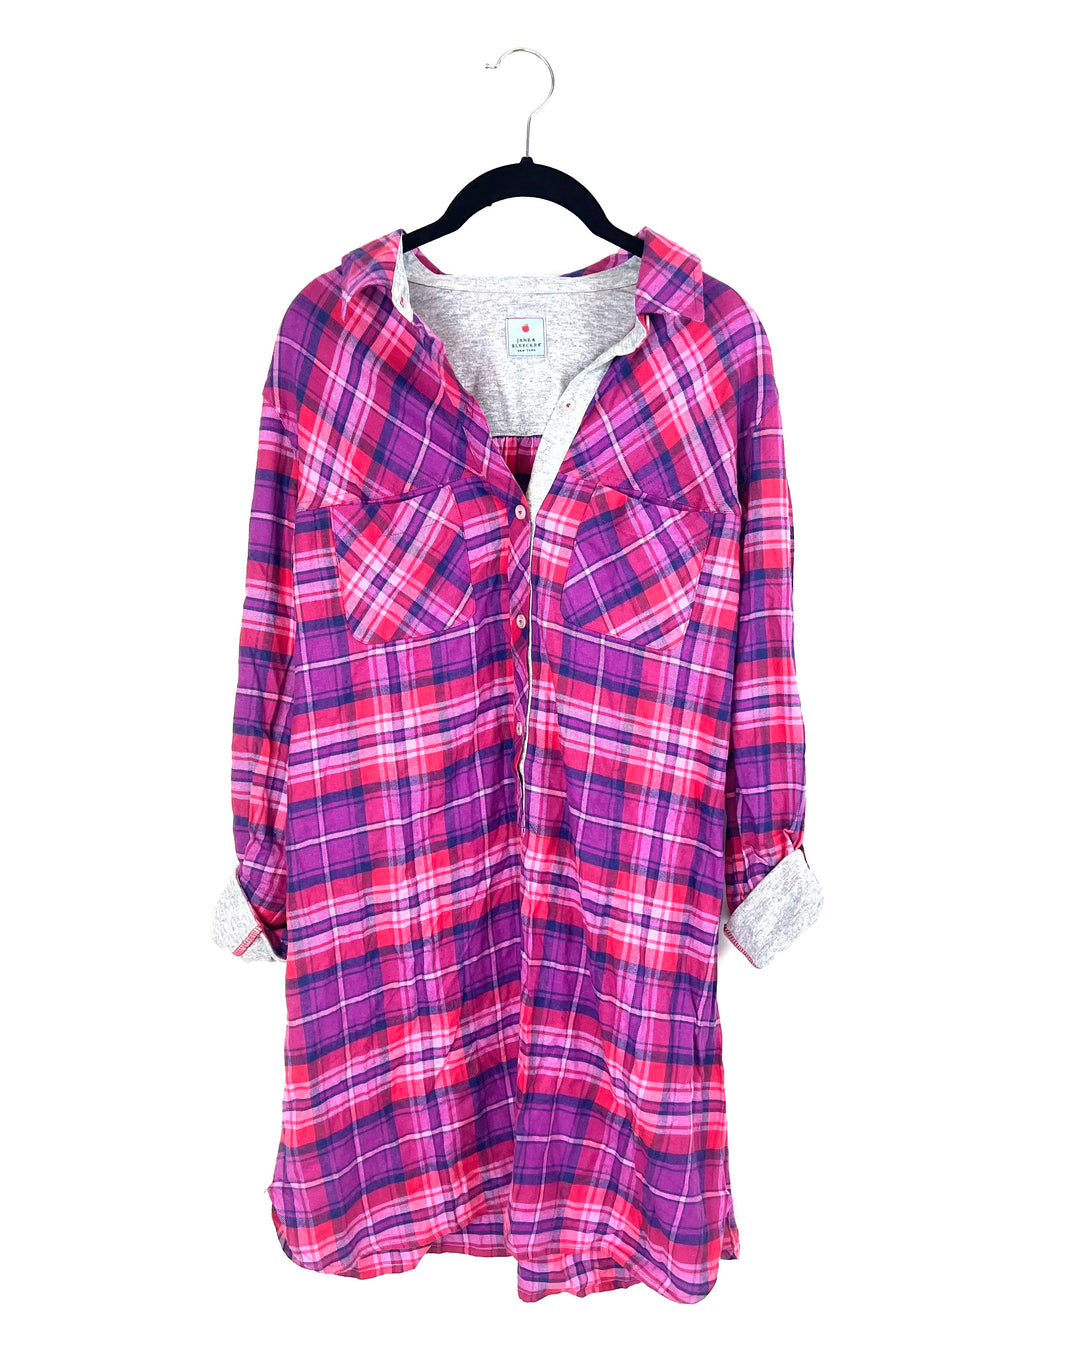 Purple And Red Plaid Nightgown - Small